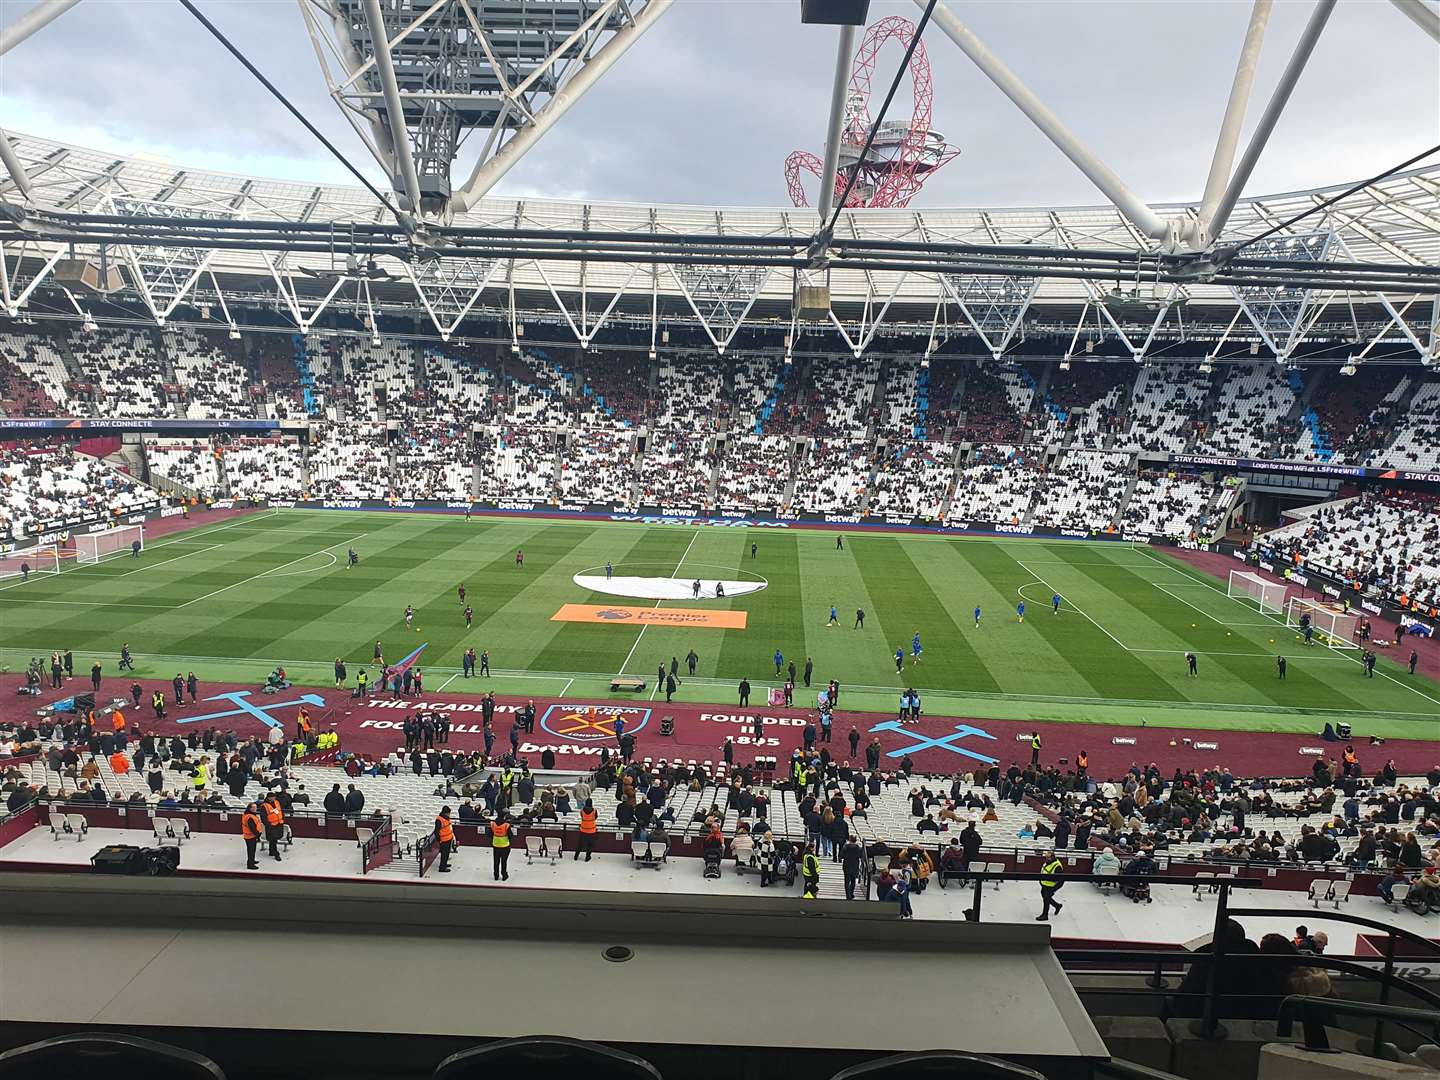 The view inside the London Stadium